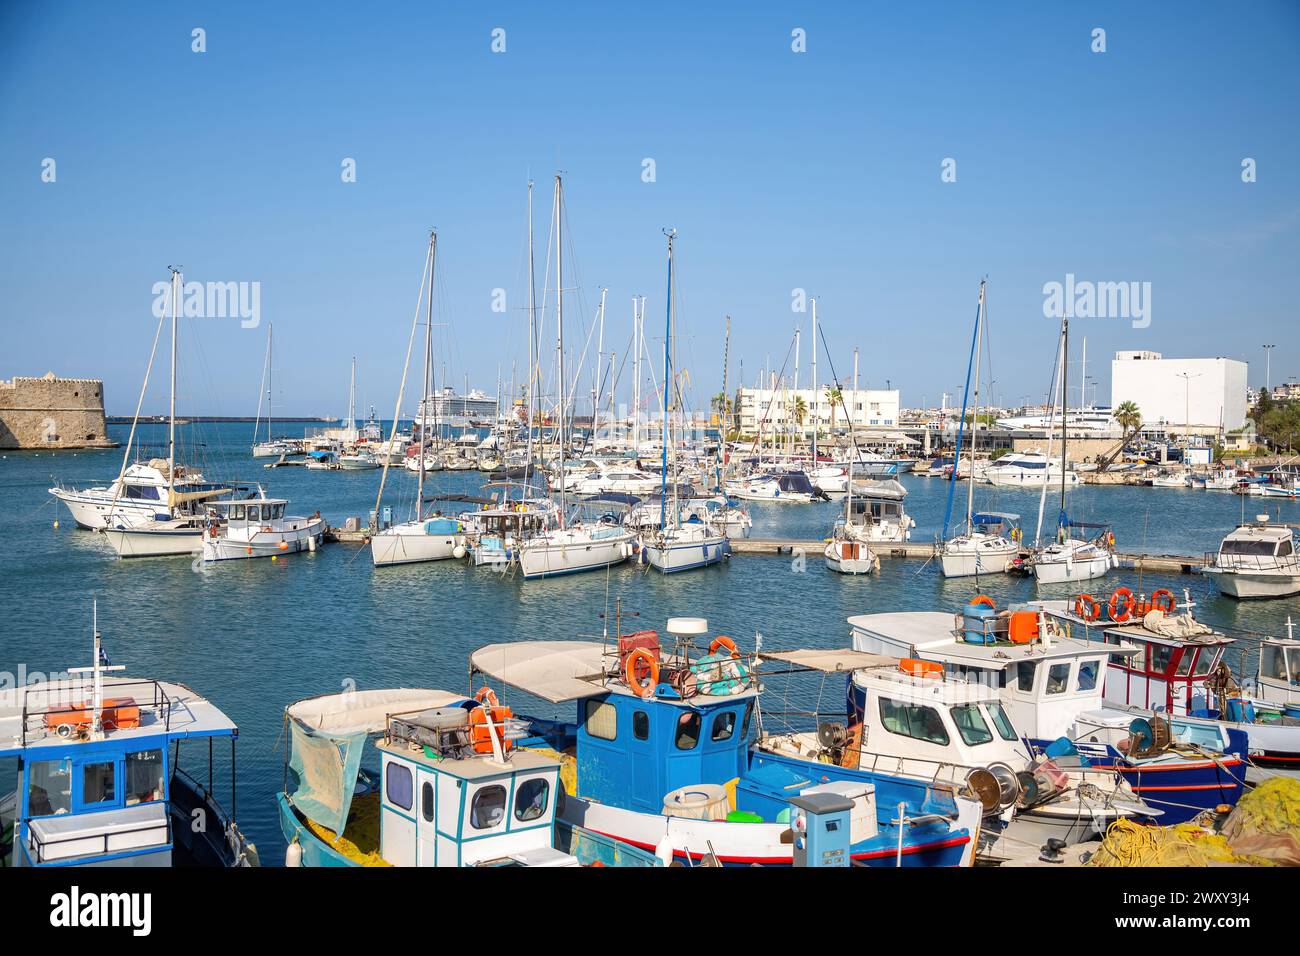 Crete island, destination Greece. Moored vessel with mast and fishing boat at Heraklion old Venetian harbor, calm sea water, blue sky background. Stock Photo